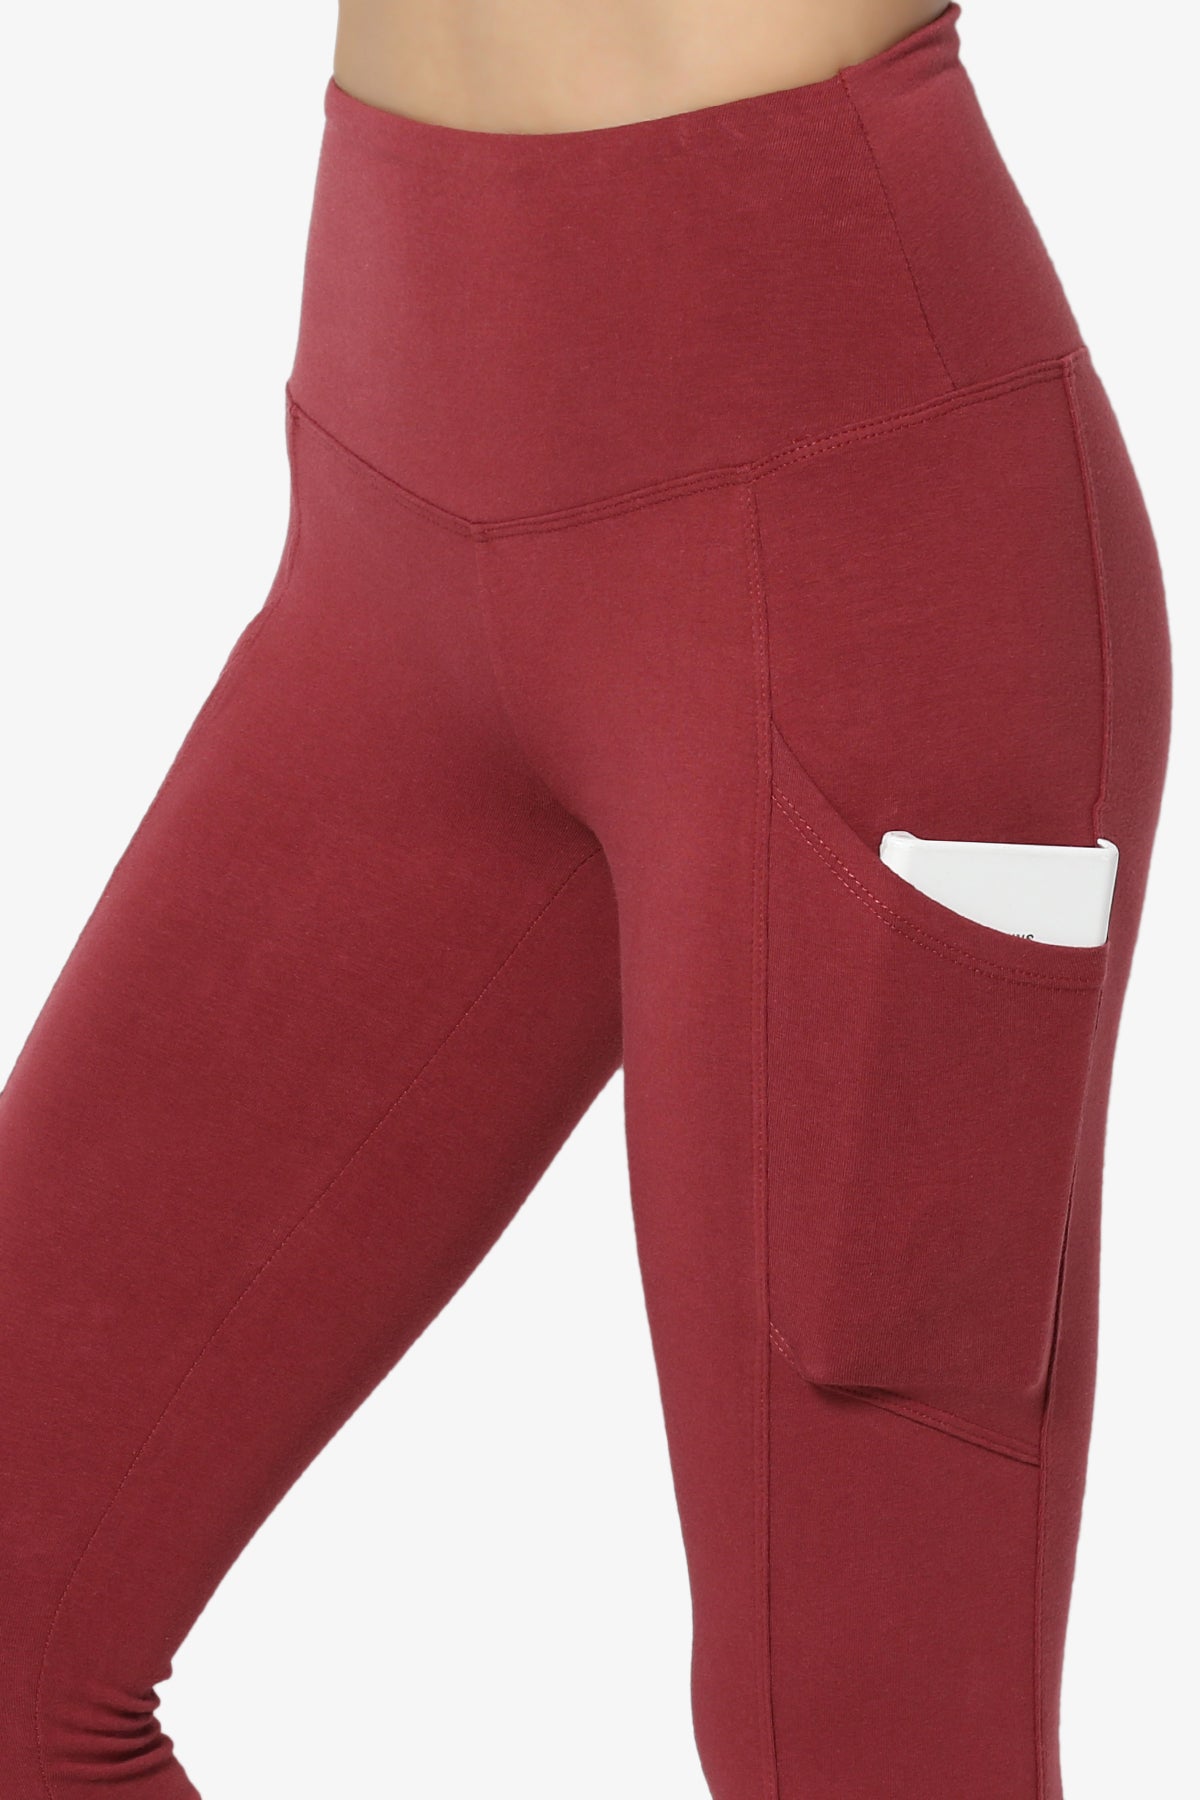 Ansley Luxe Cotton Leggings with Pockets BRICK_5